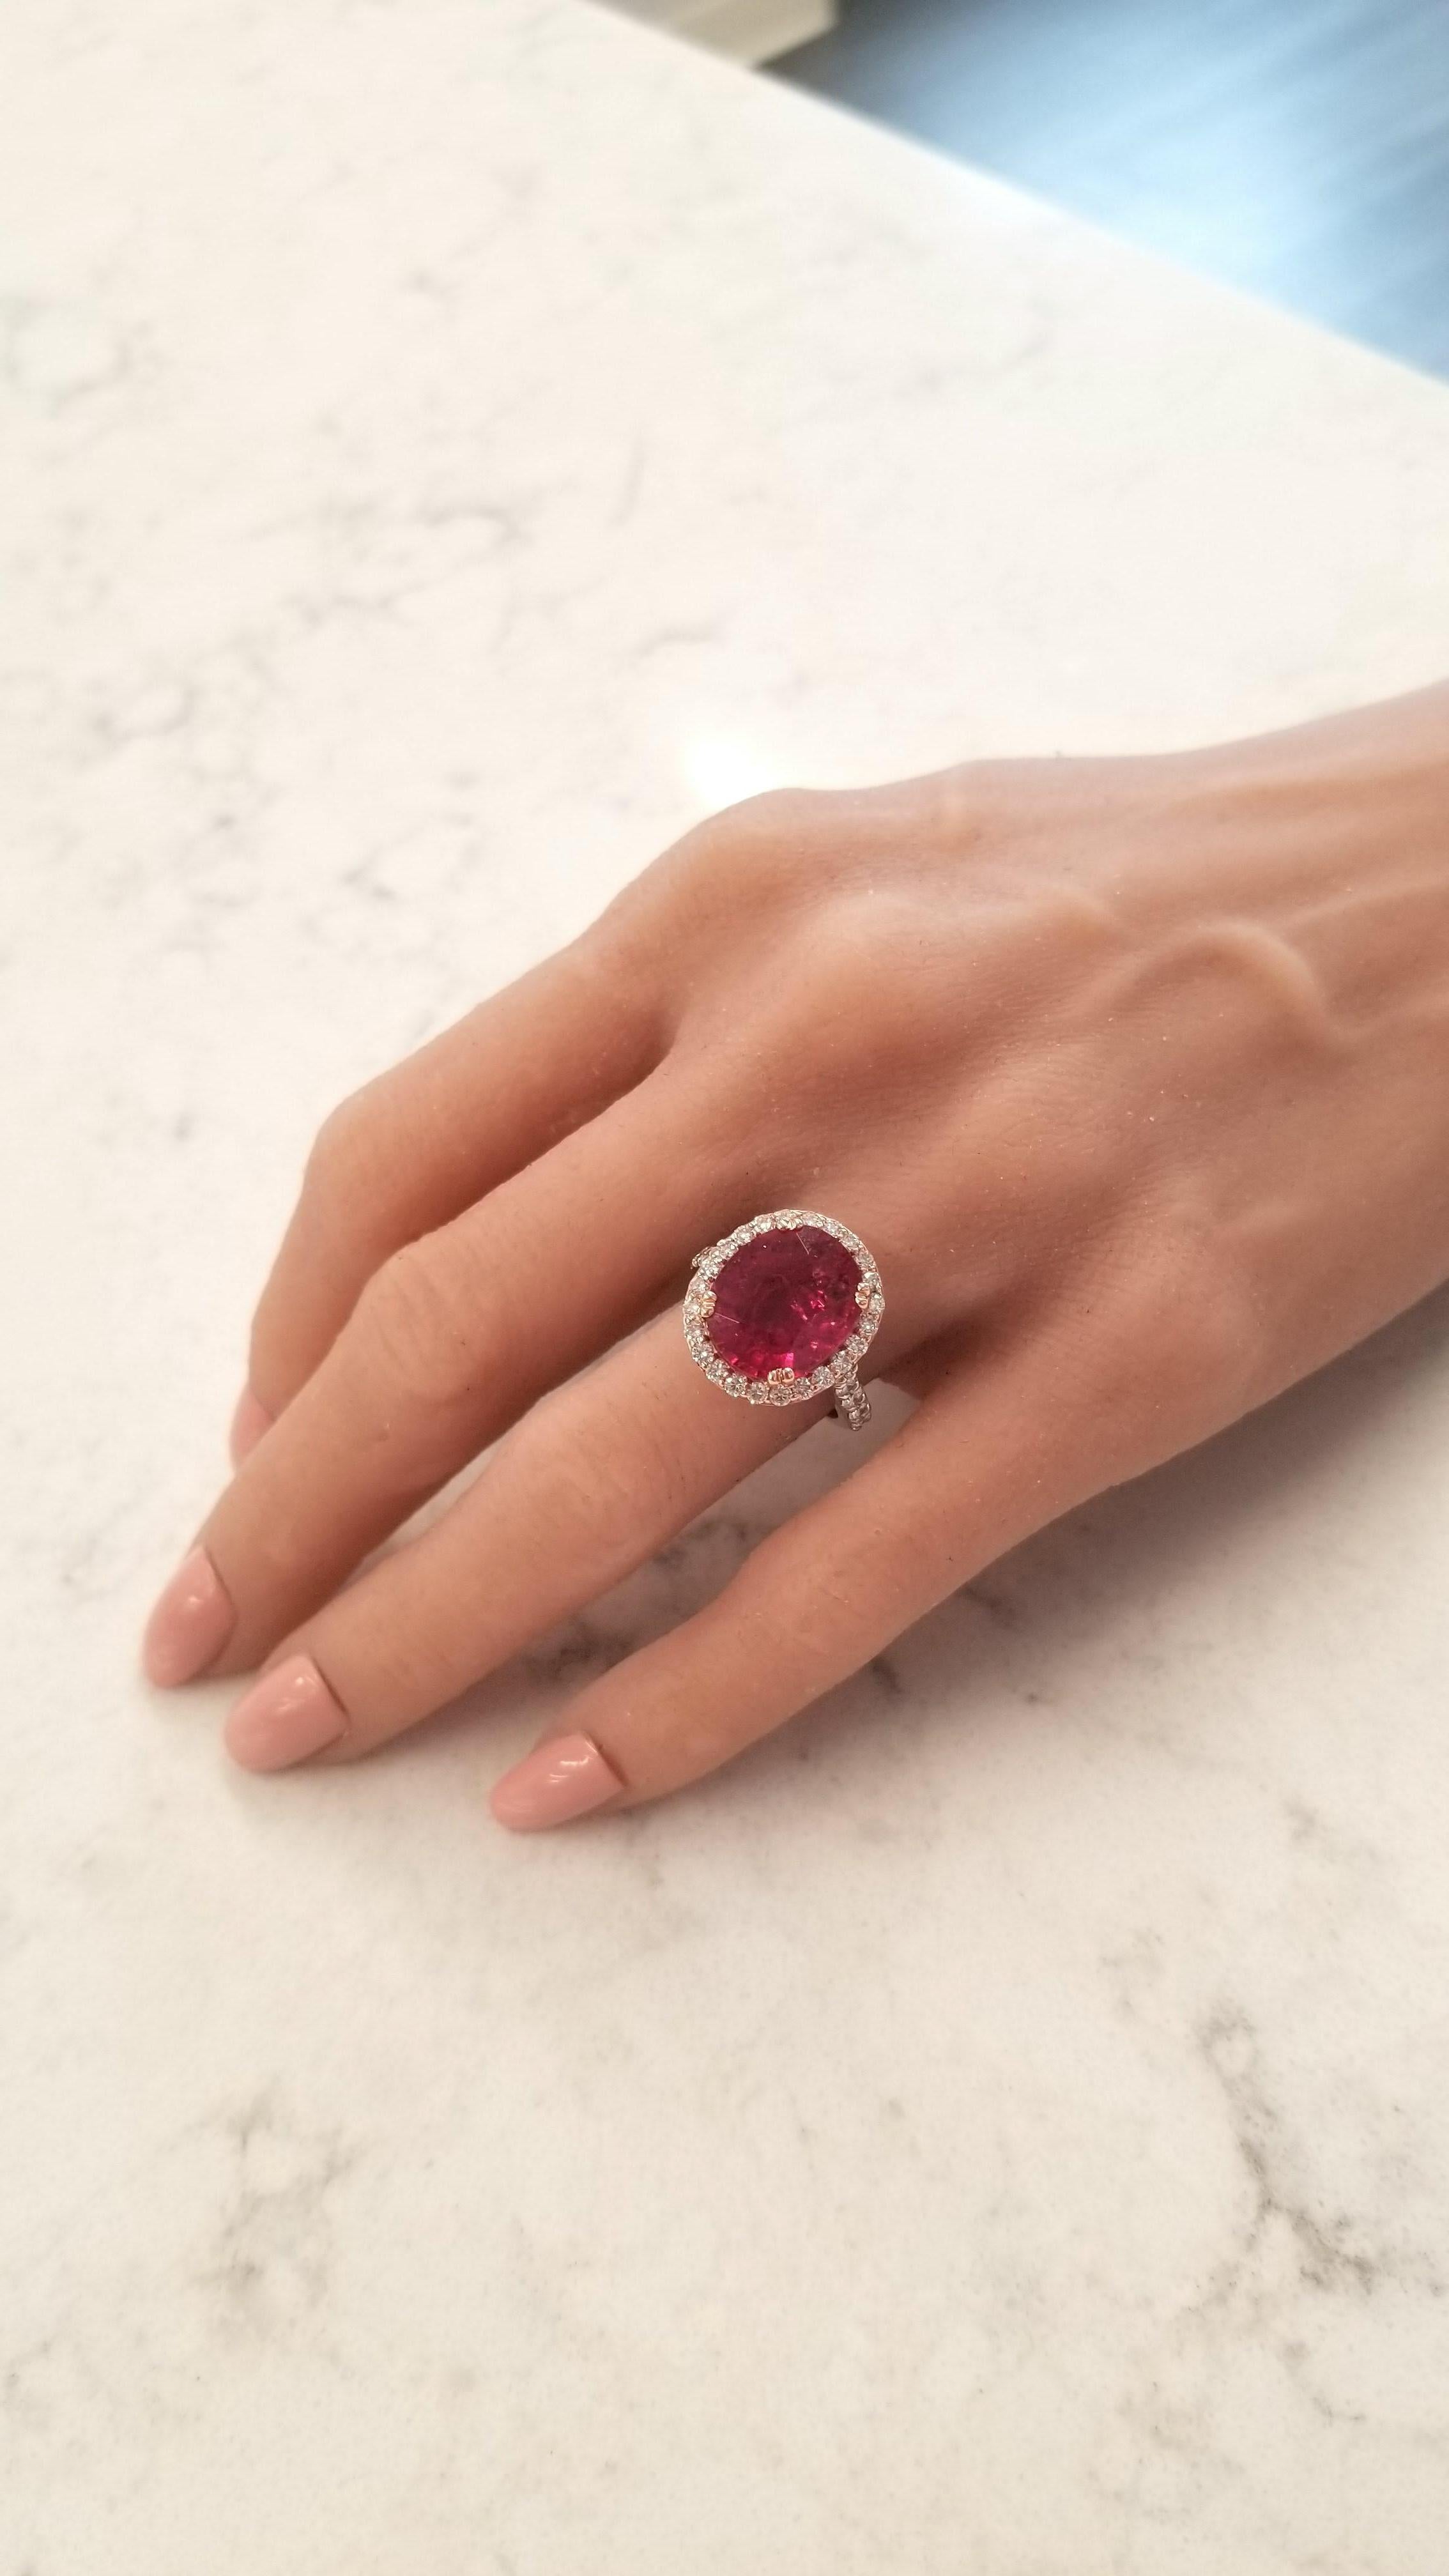 This is a 7.19 carat oval cut vibrant raspberry rubellite tourmaline and measures 11.68 X 13.80mm. The gem source is Brazil; its color is vivid, its transparency and luster are excellent. The intense color is framed by 34 sparkling round brilliant